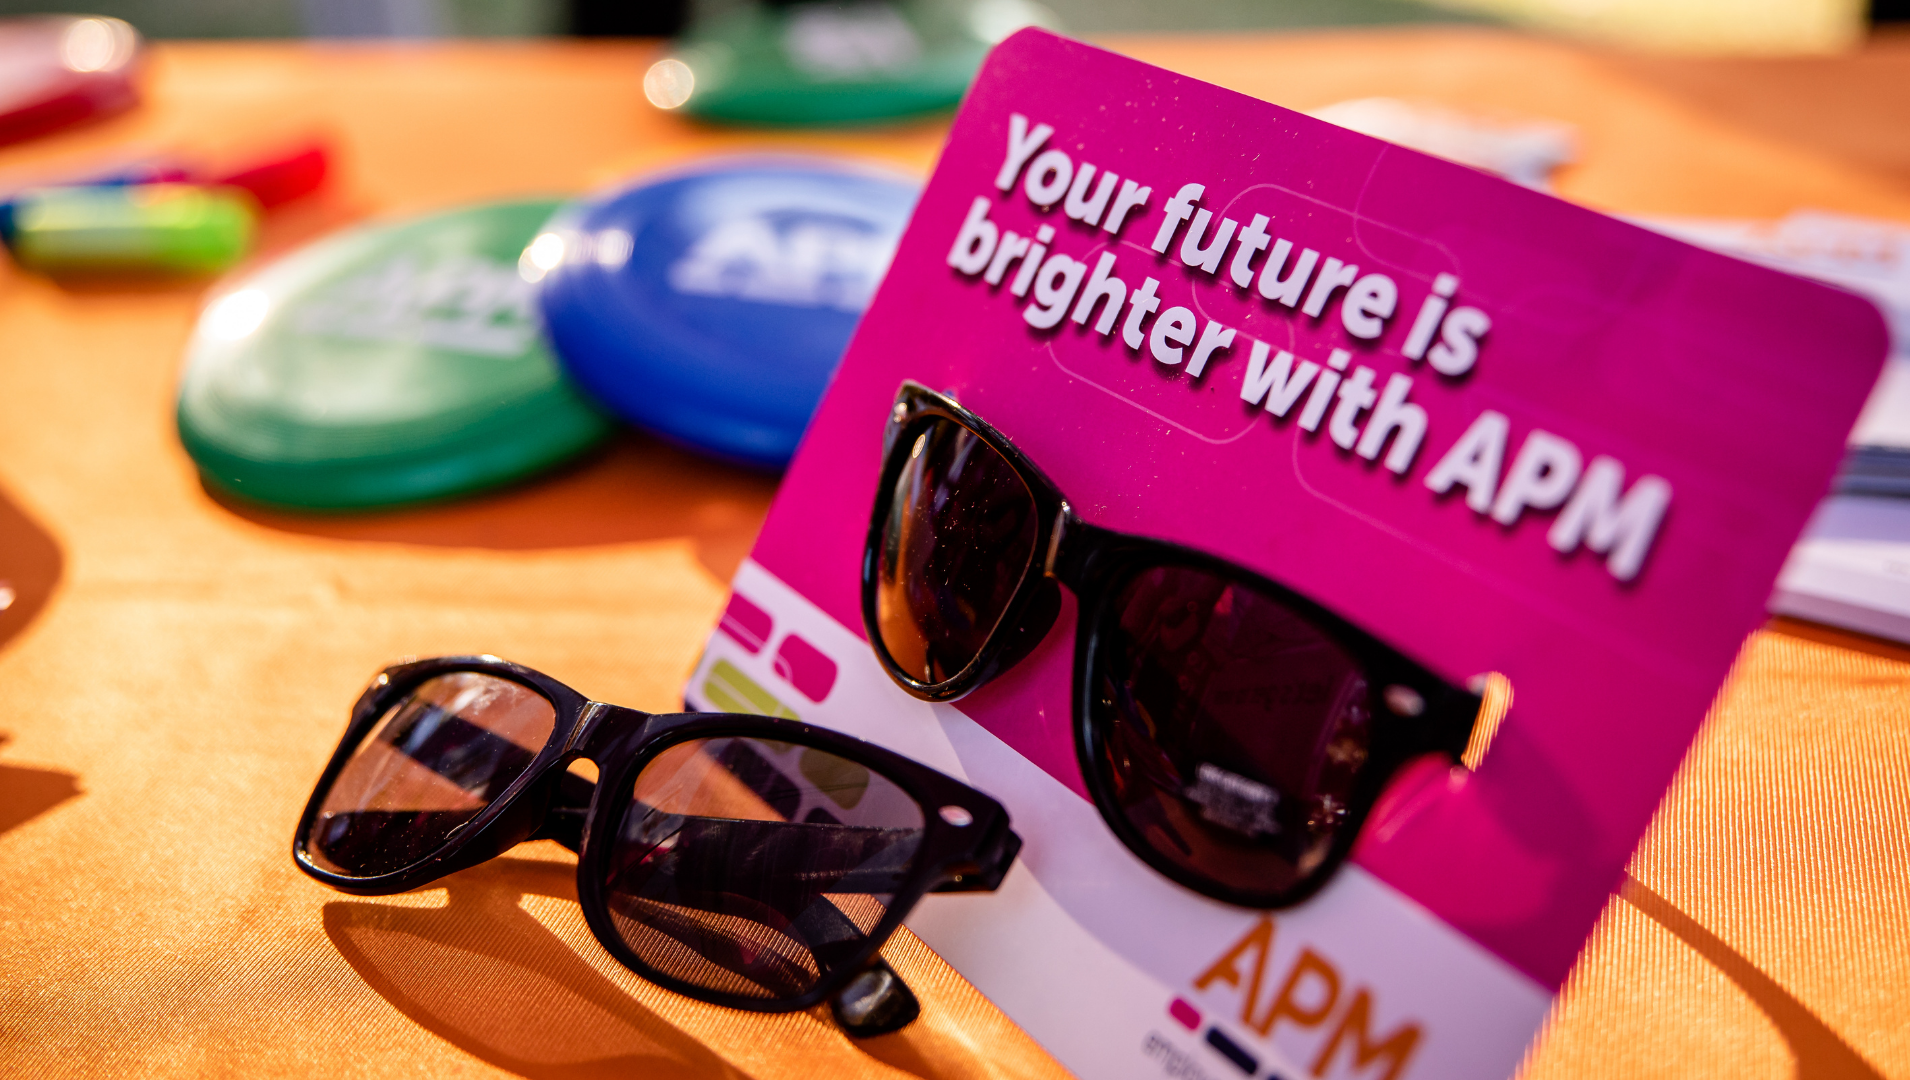 Your future is brighter with APM